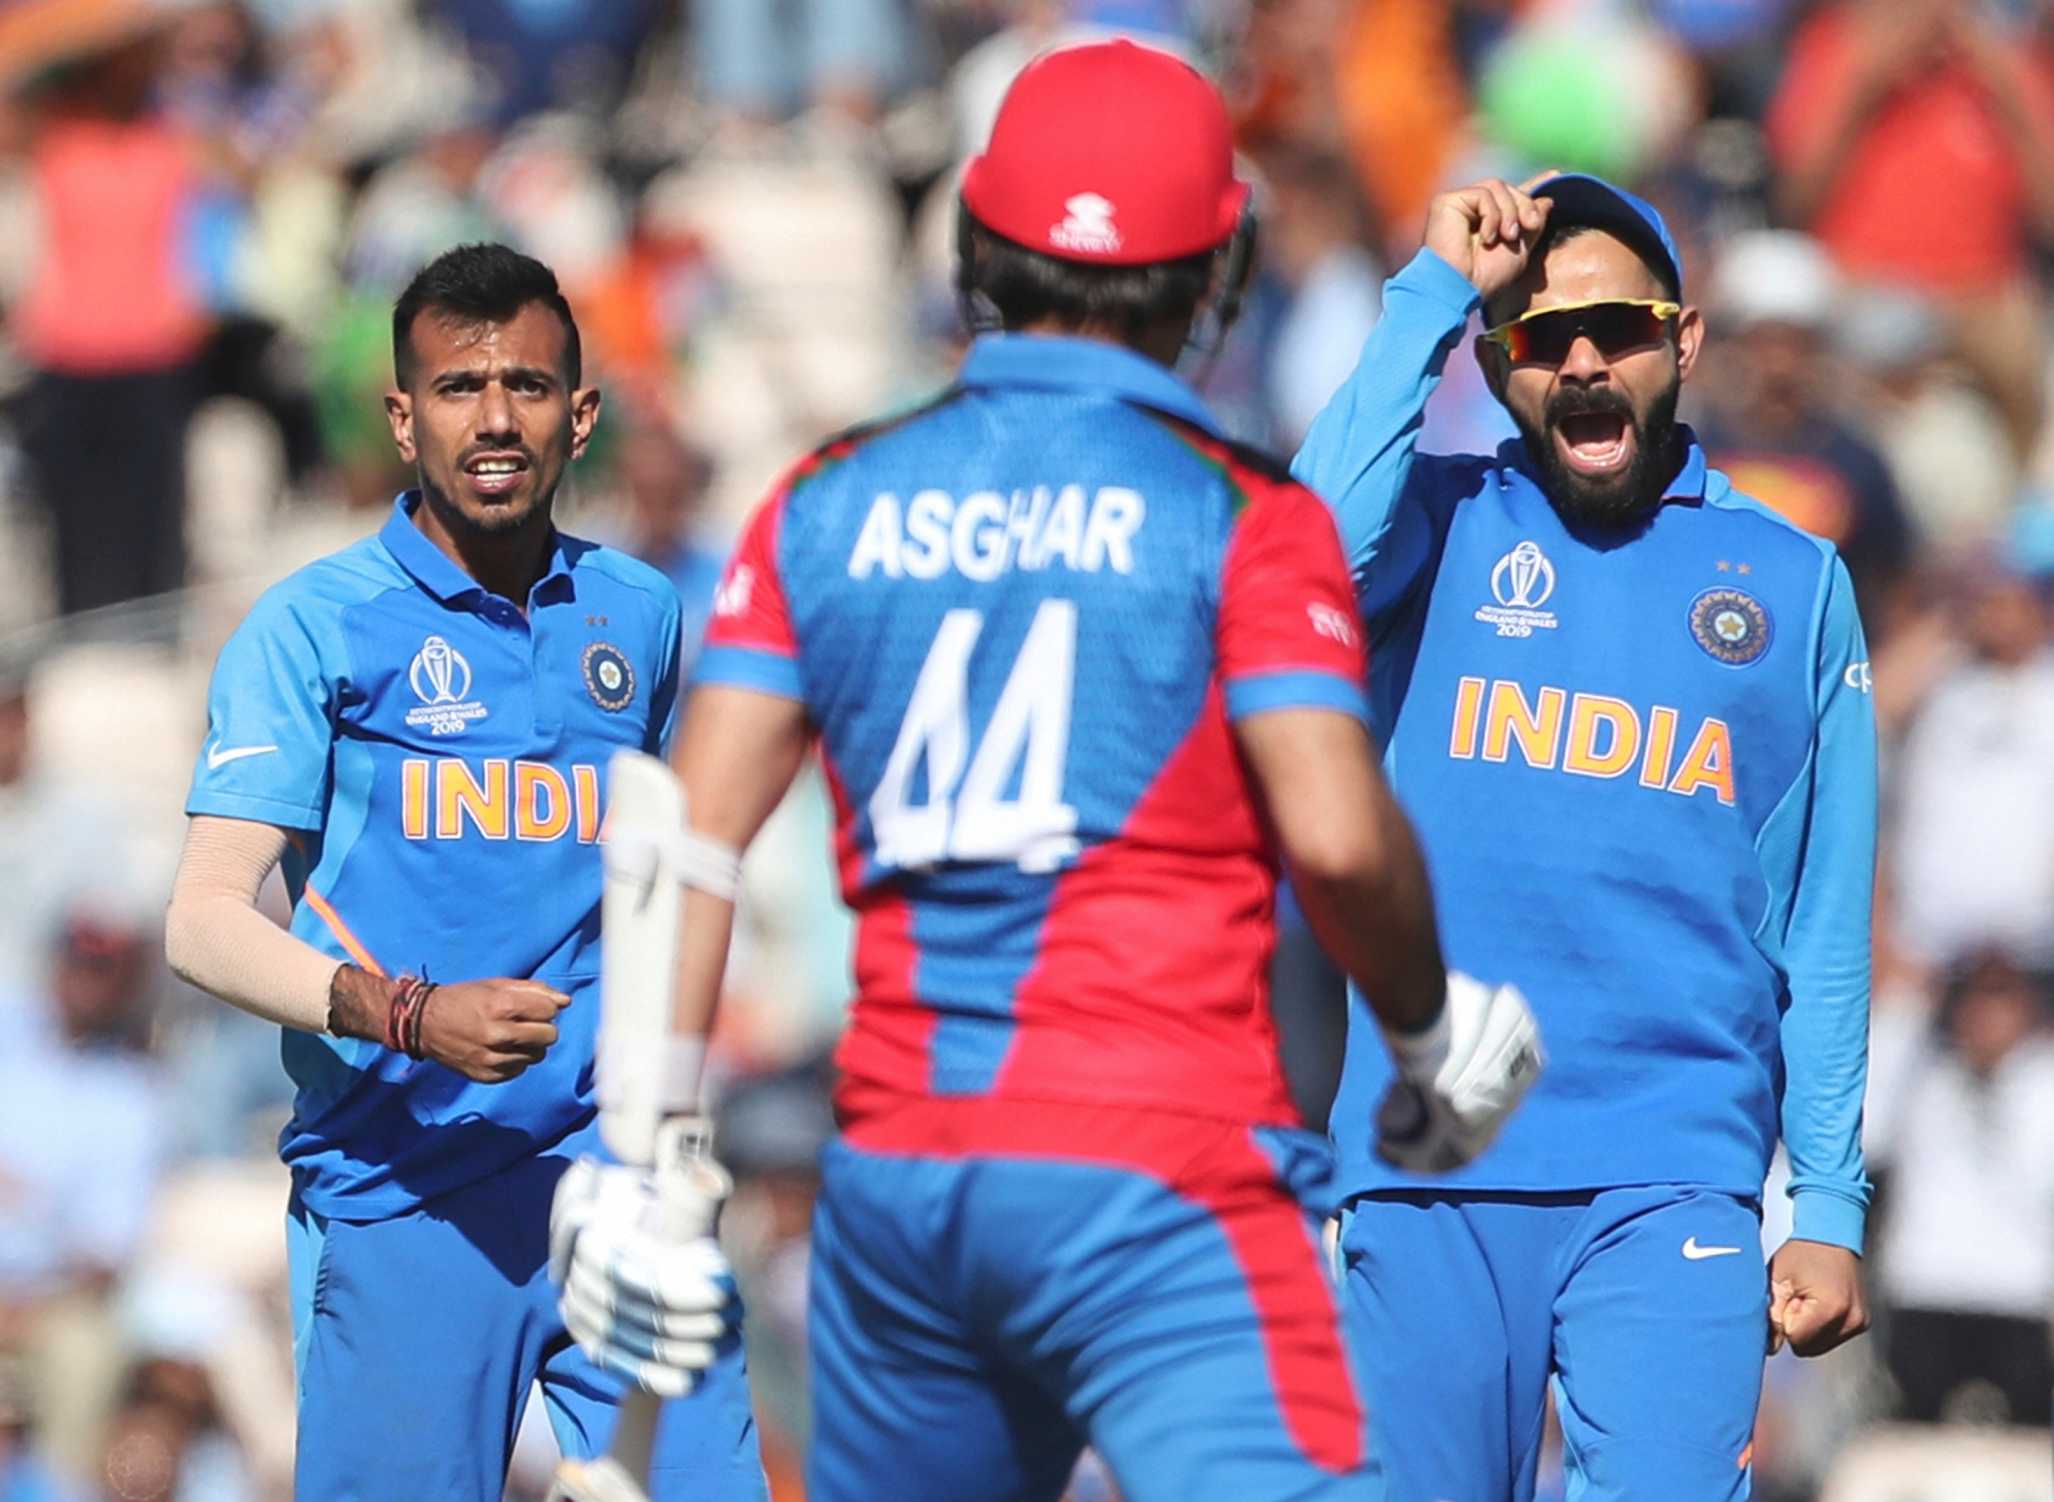 Daily wrap: India beat Afghanistan, Bengal clashes and other stories